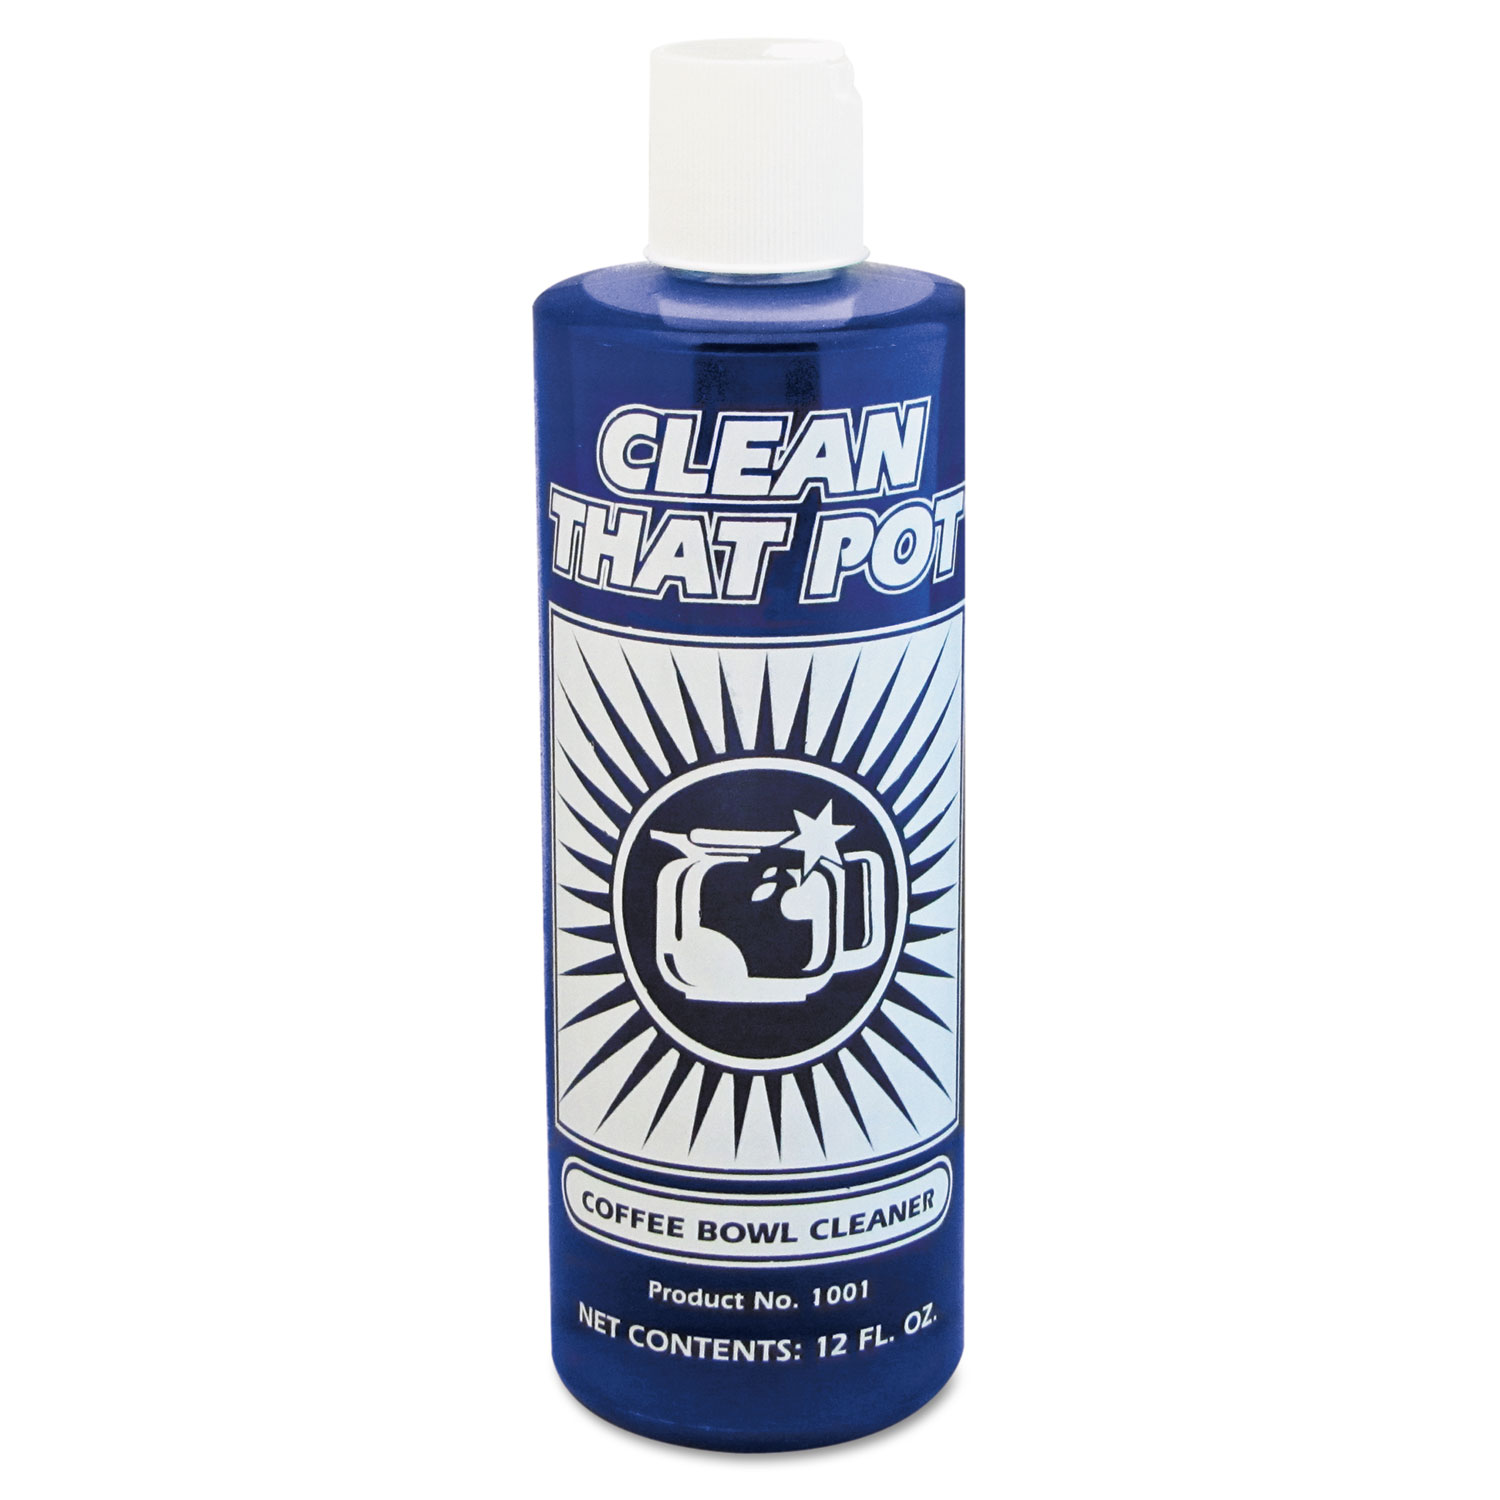  Clean That Pot CLE1001 Coffee Bowl Cleaner, 12oz Bottle (CCH1001) 